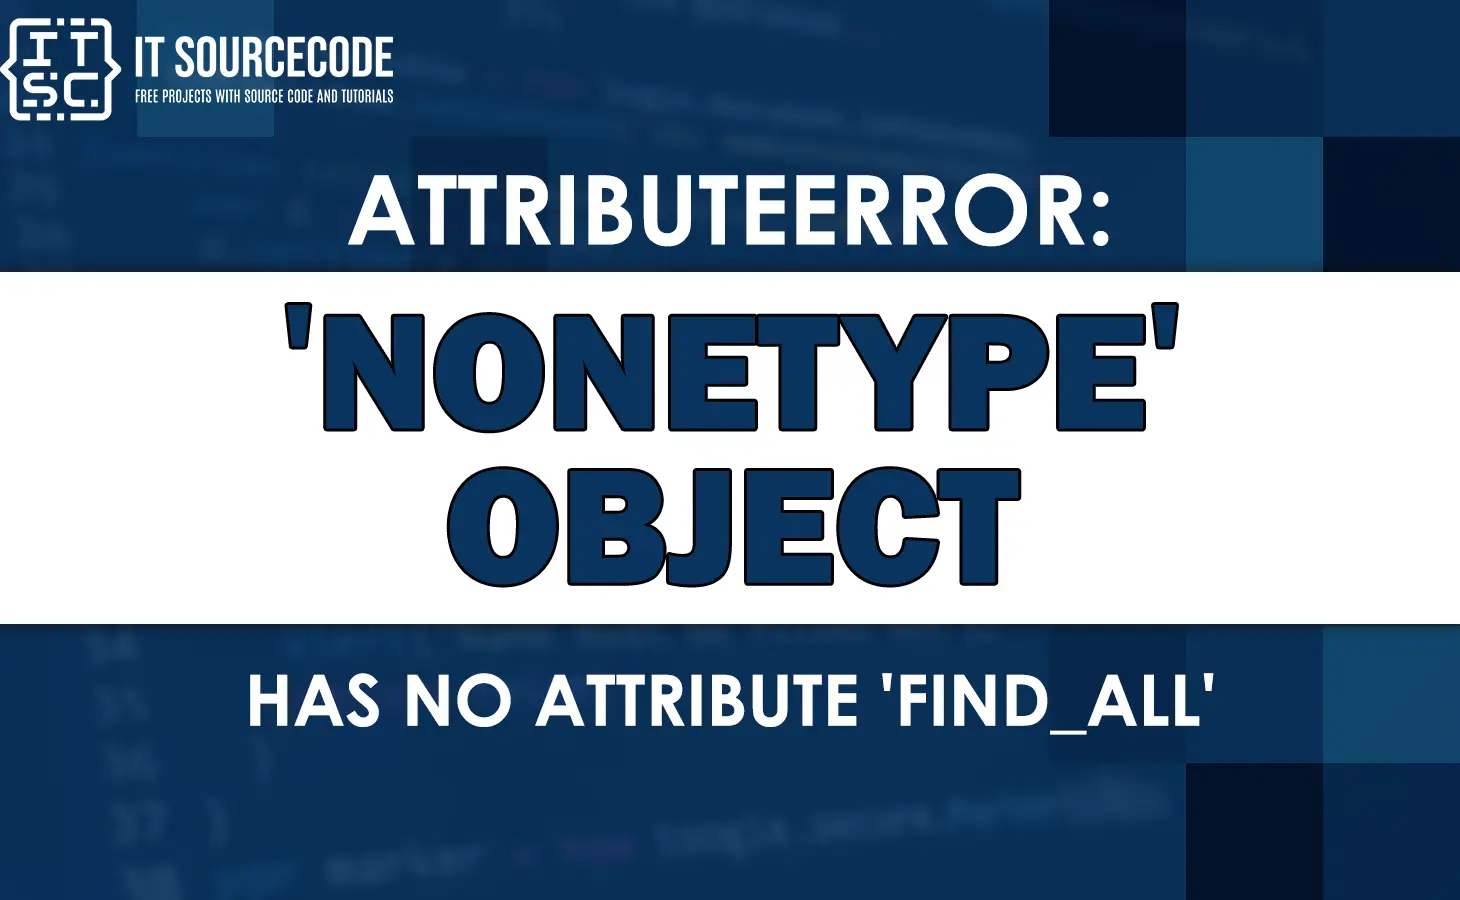 Attributeerror: nonetype object has no attribute find_all